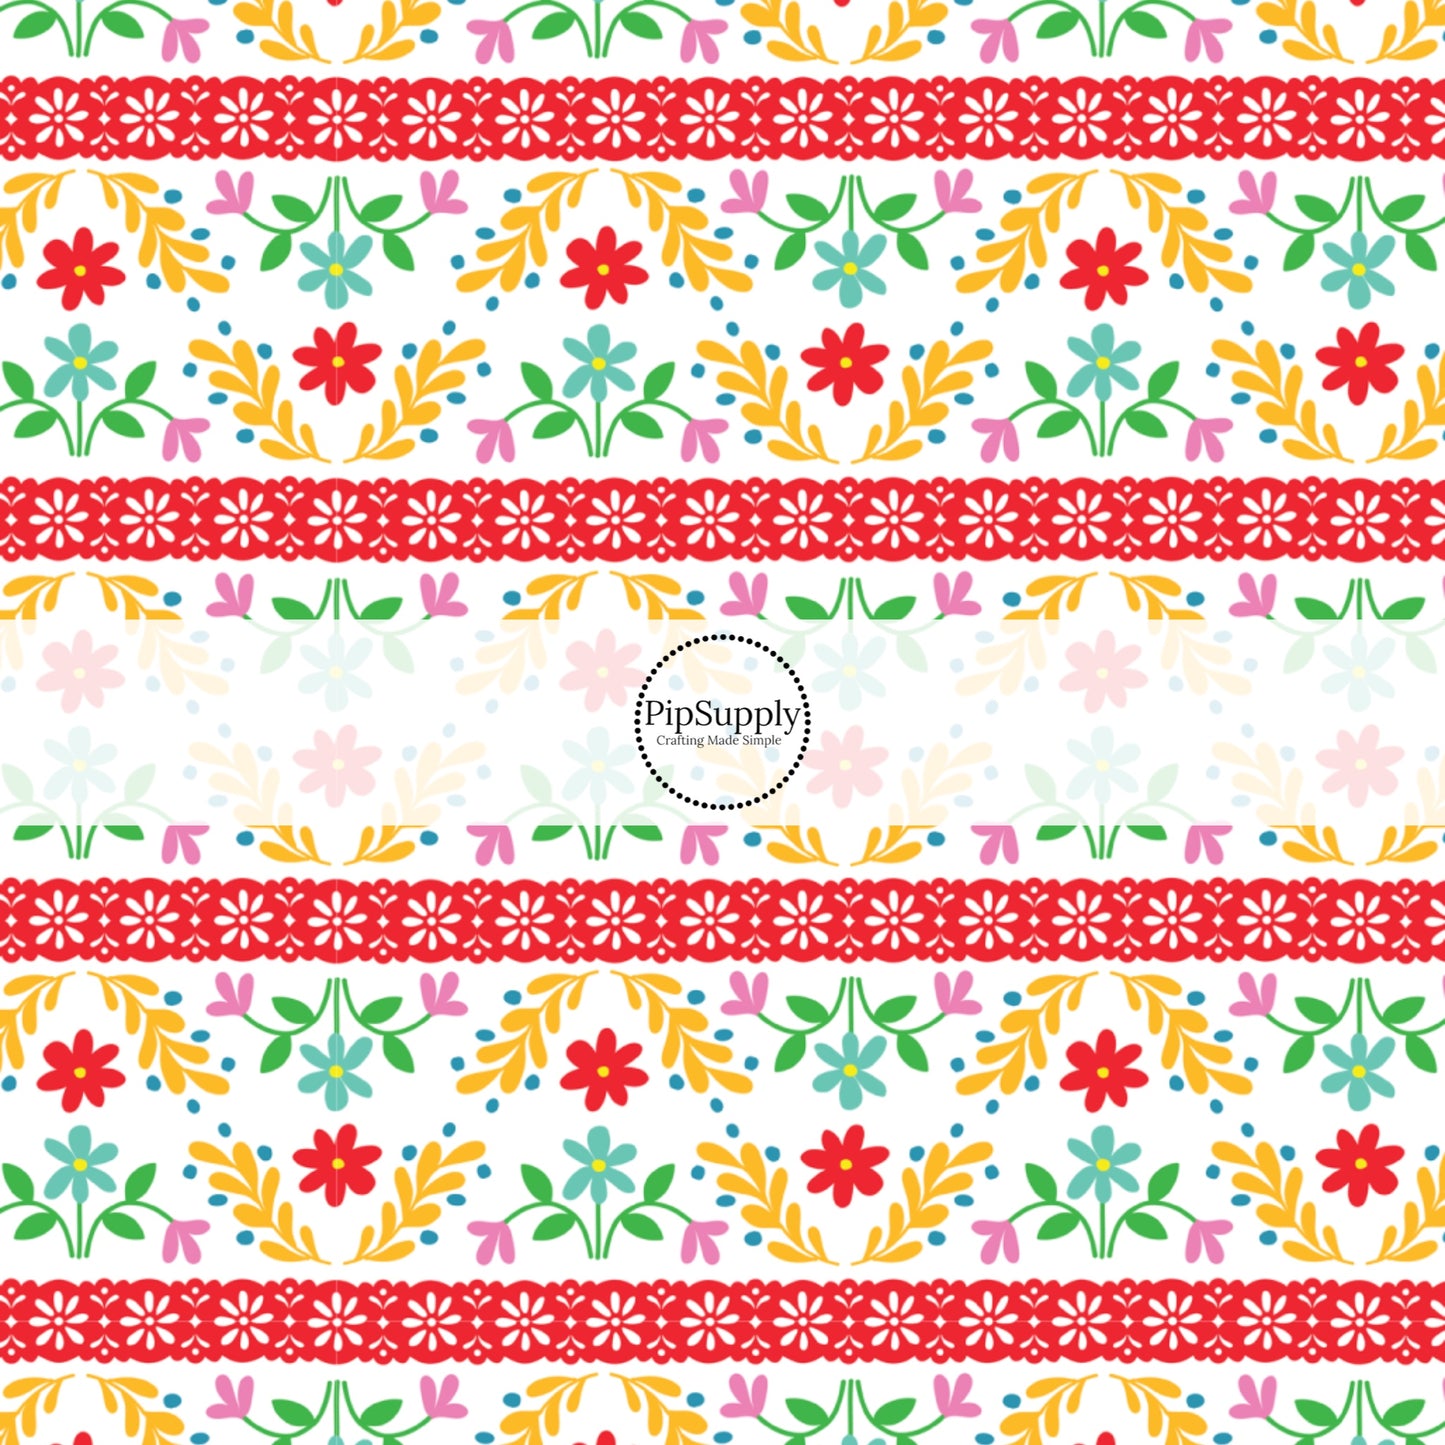 Multi-Colored Floral Papel Picado Fabric by the Yard.